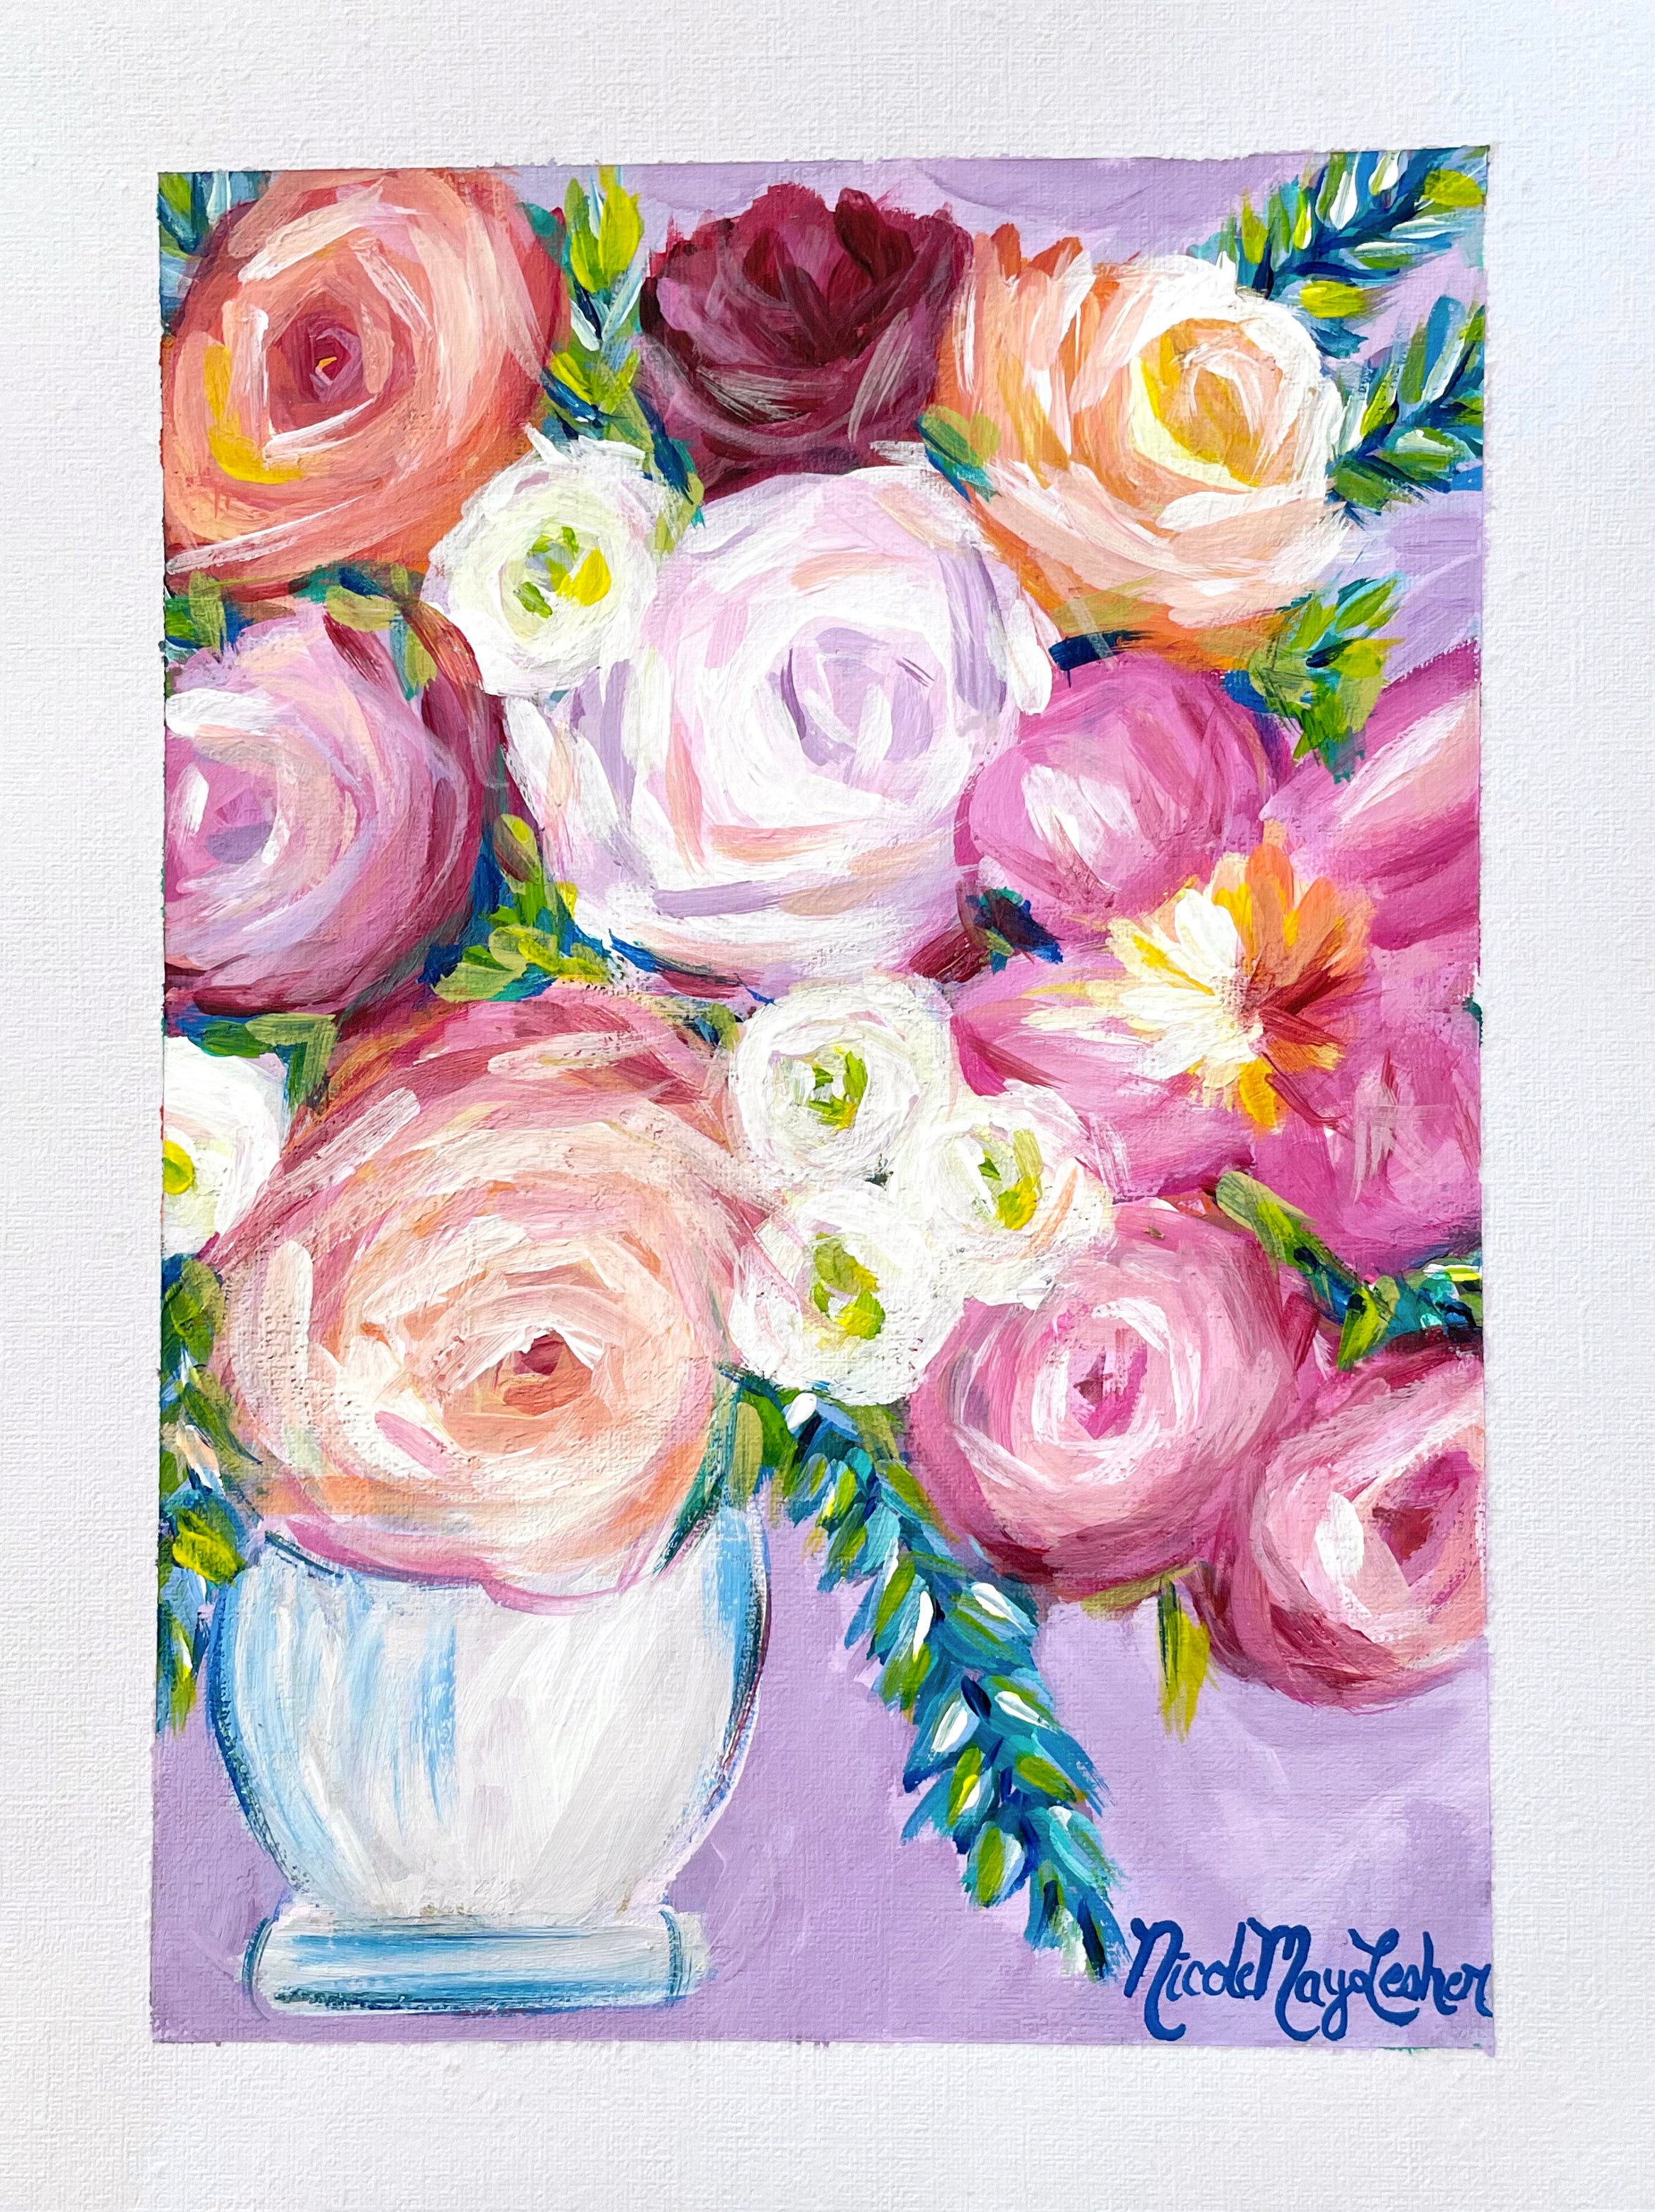 Romance Blossoms | Nicole May Lesher | Original Flower Painting on Paper